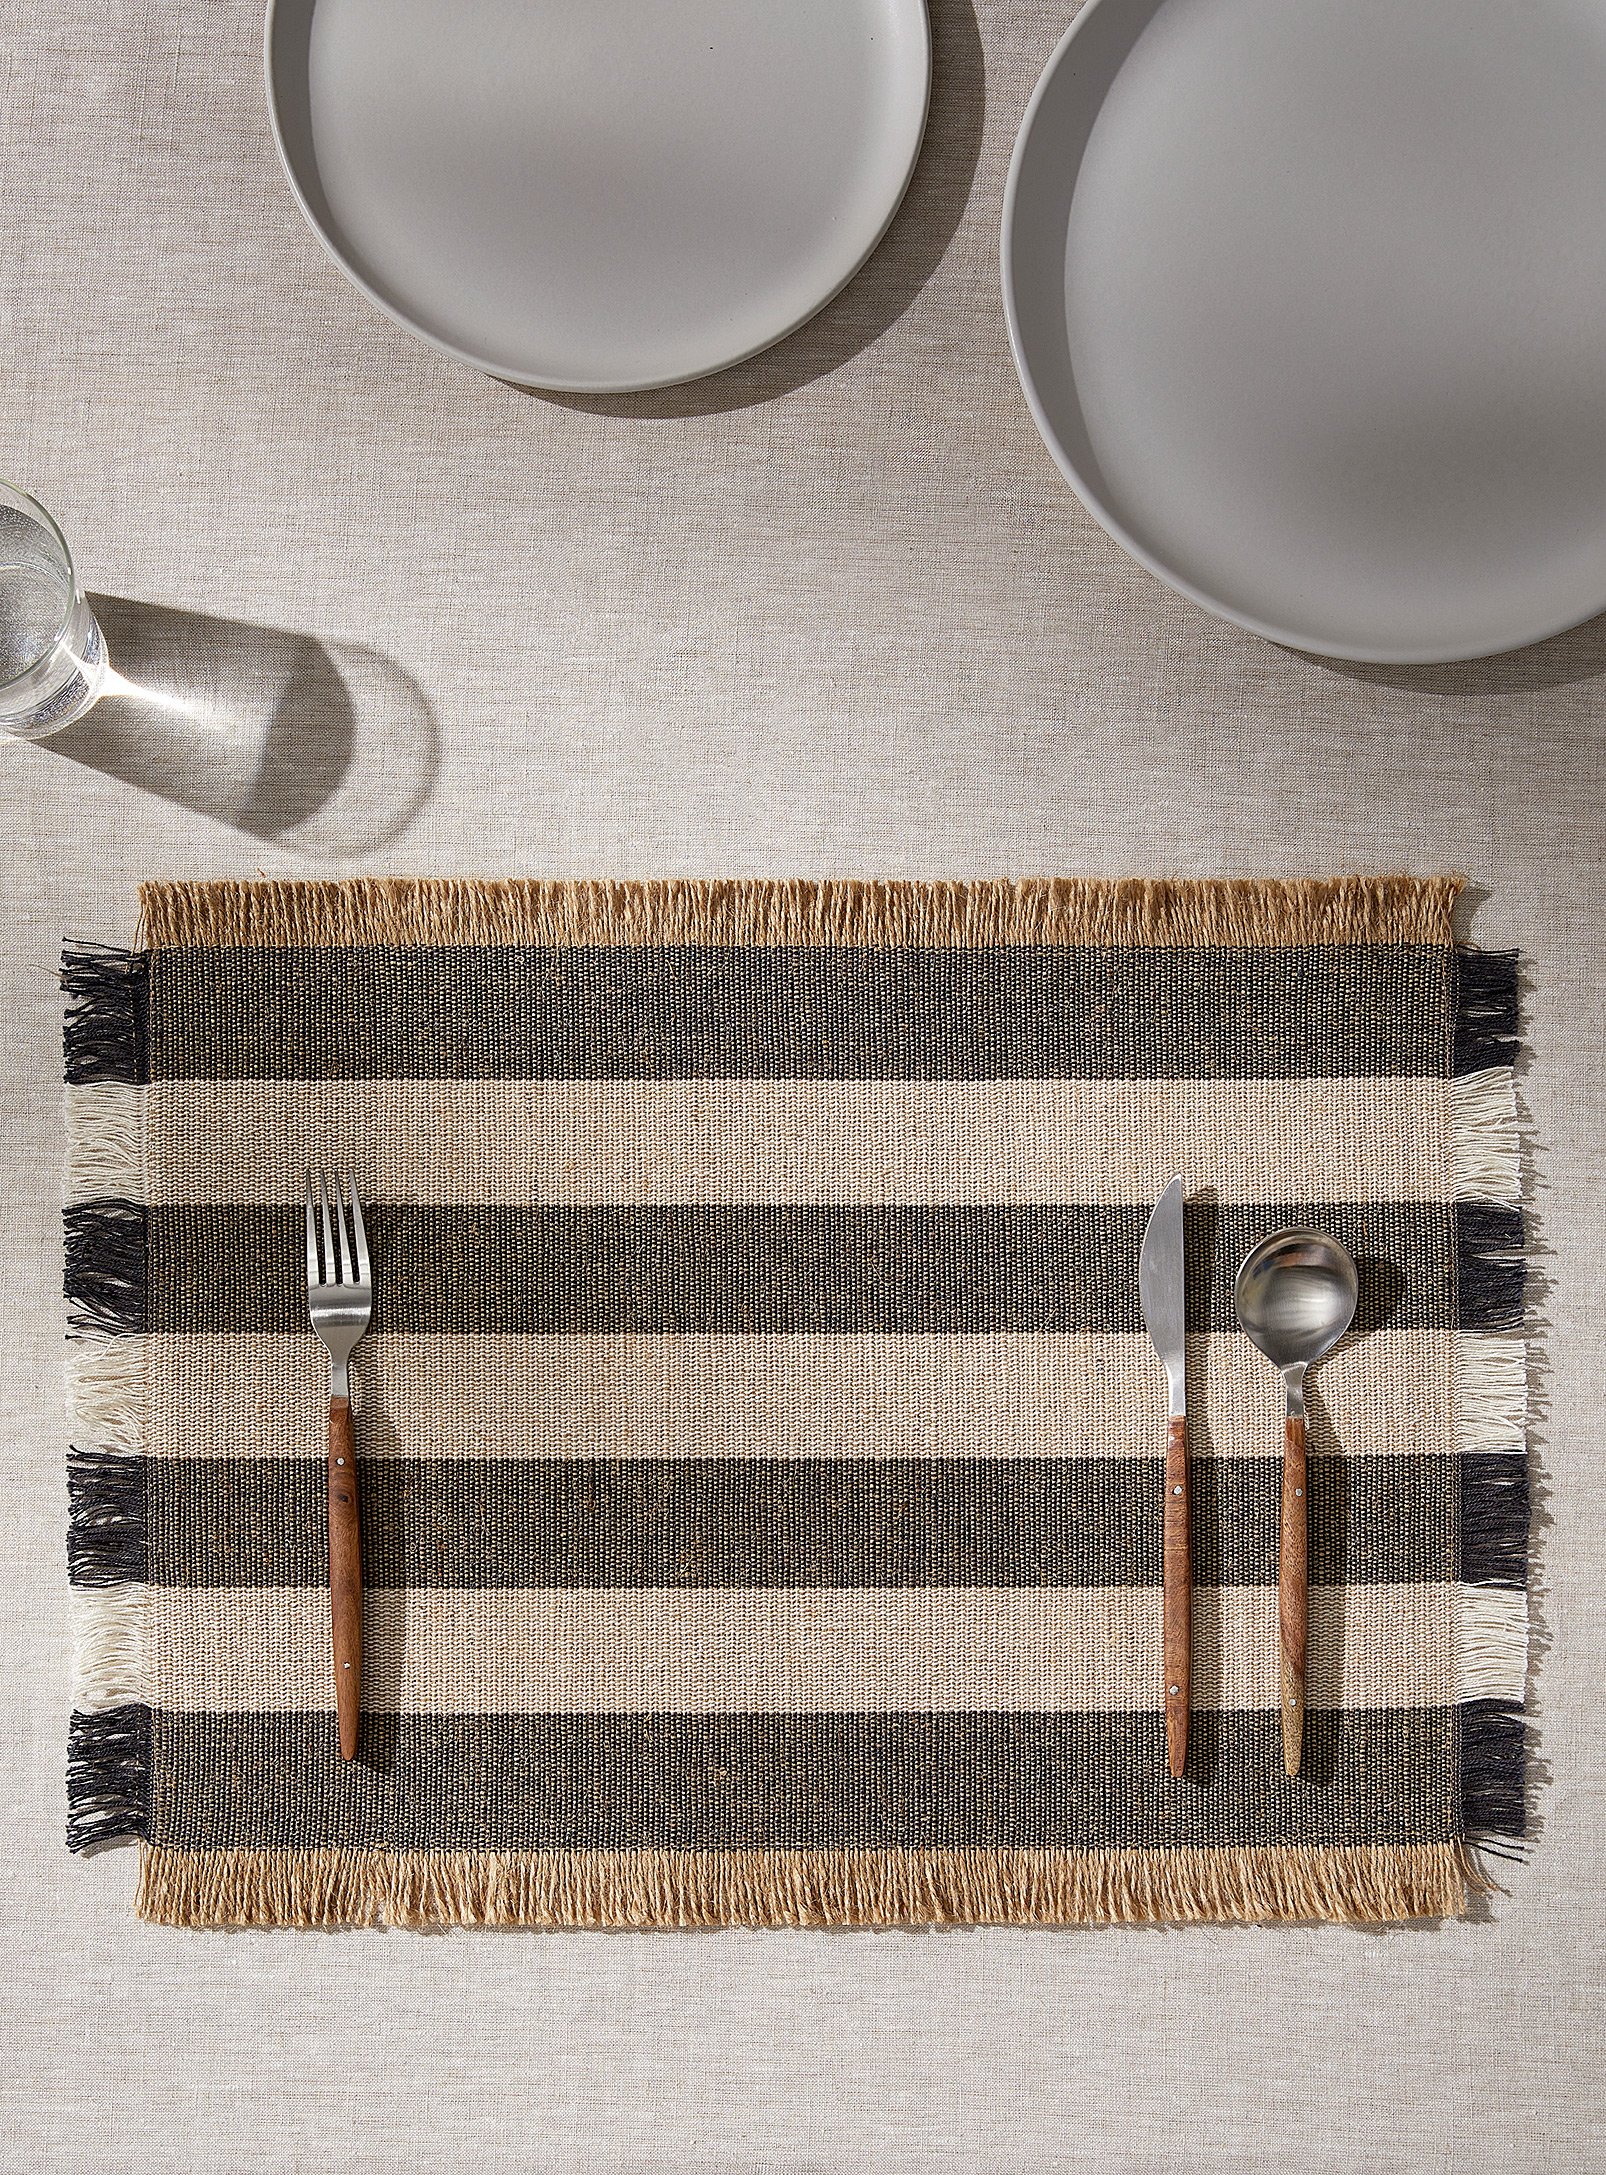 Simons Maison Maritime Stripes Jute And Cotton Placemat In Gray